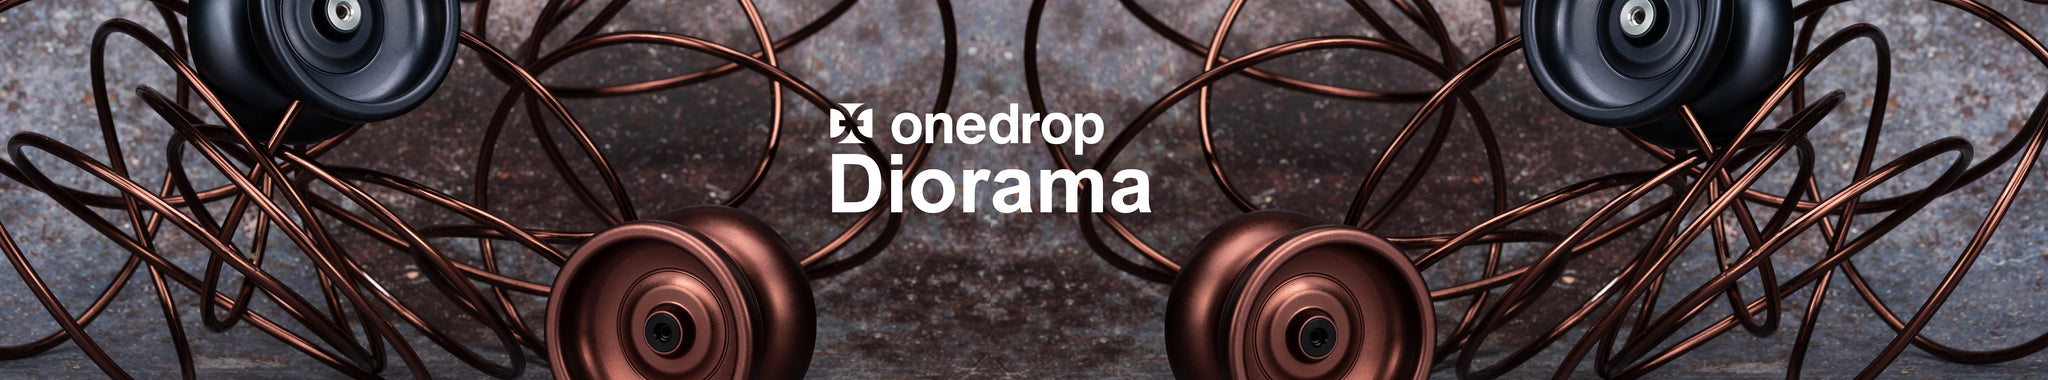 Diorama by OneDrop